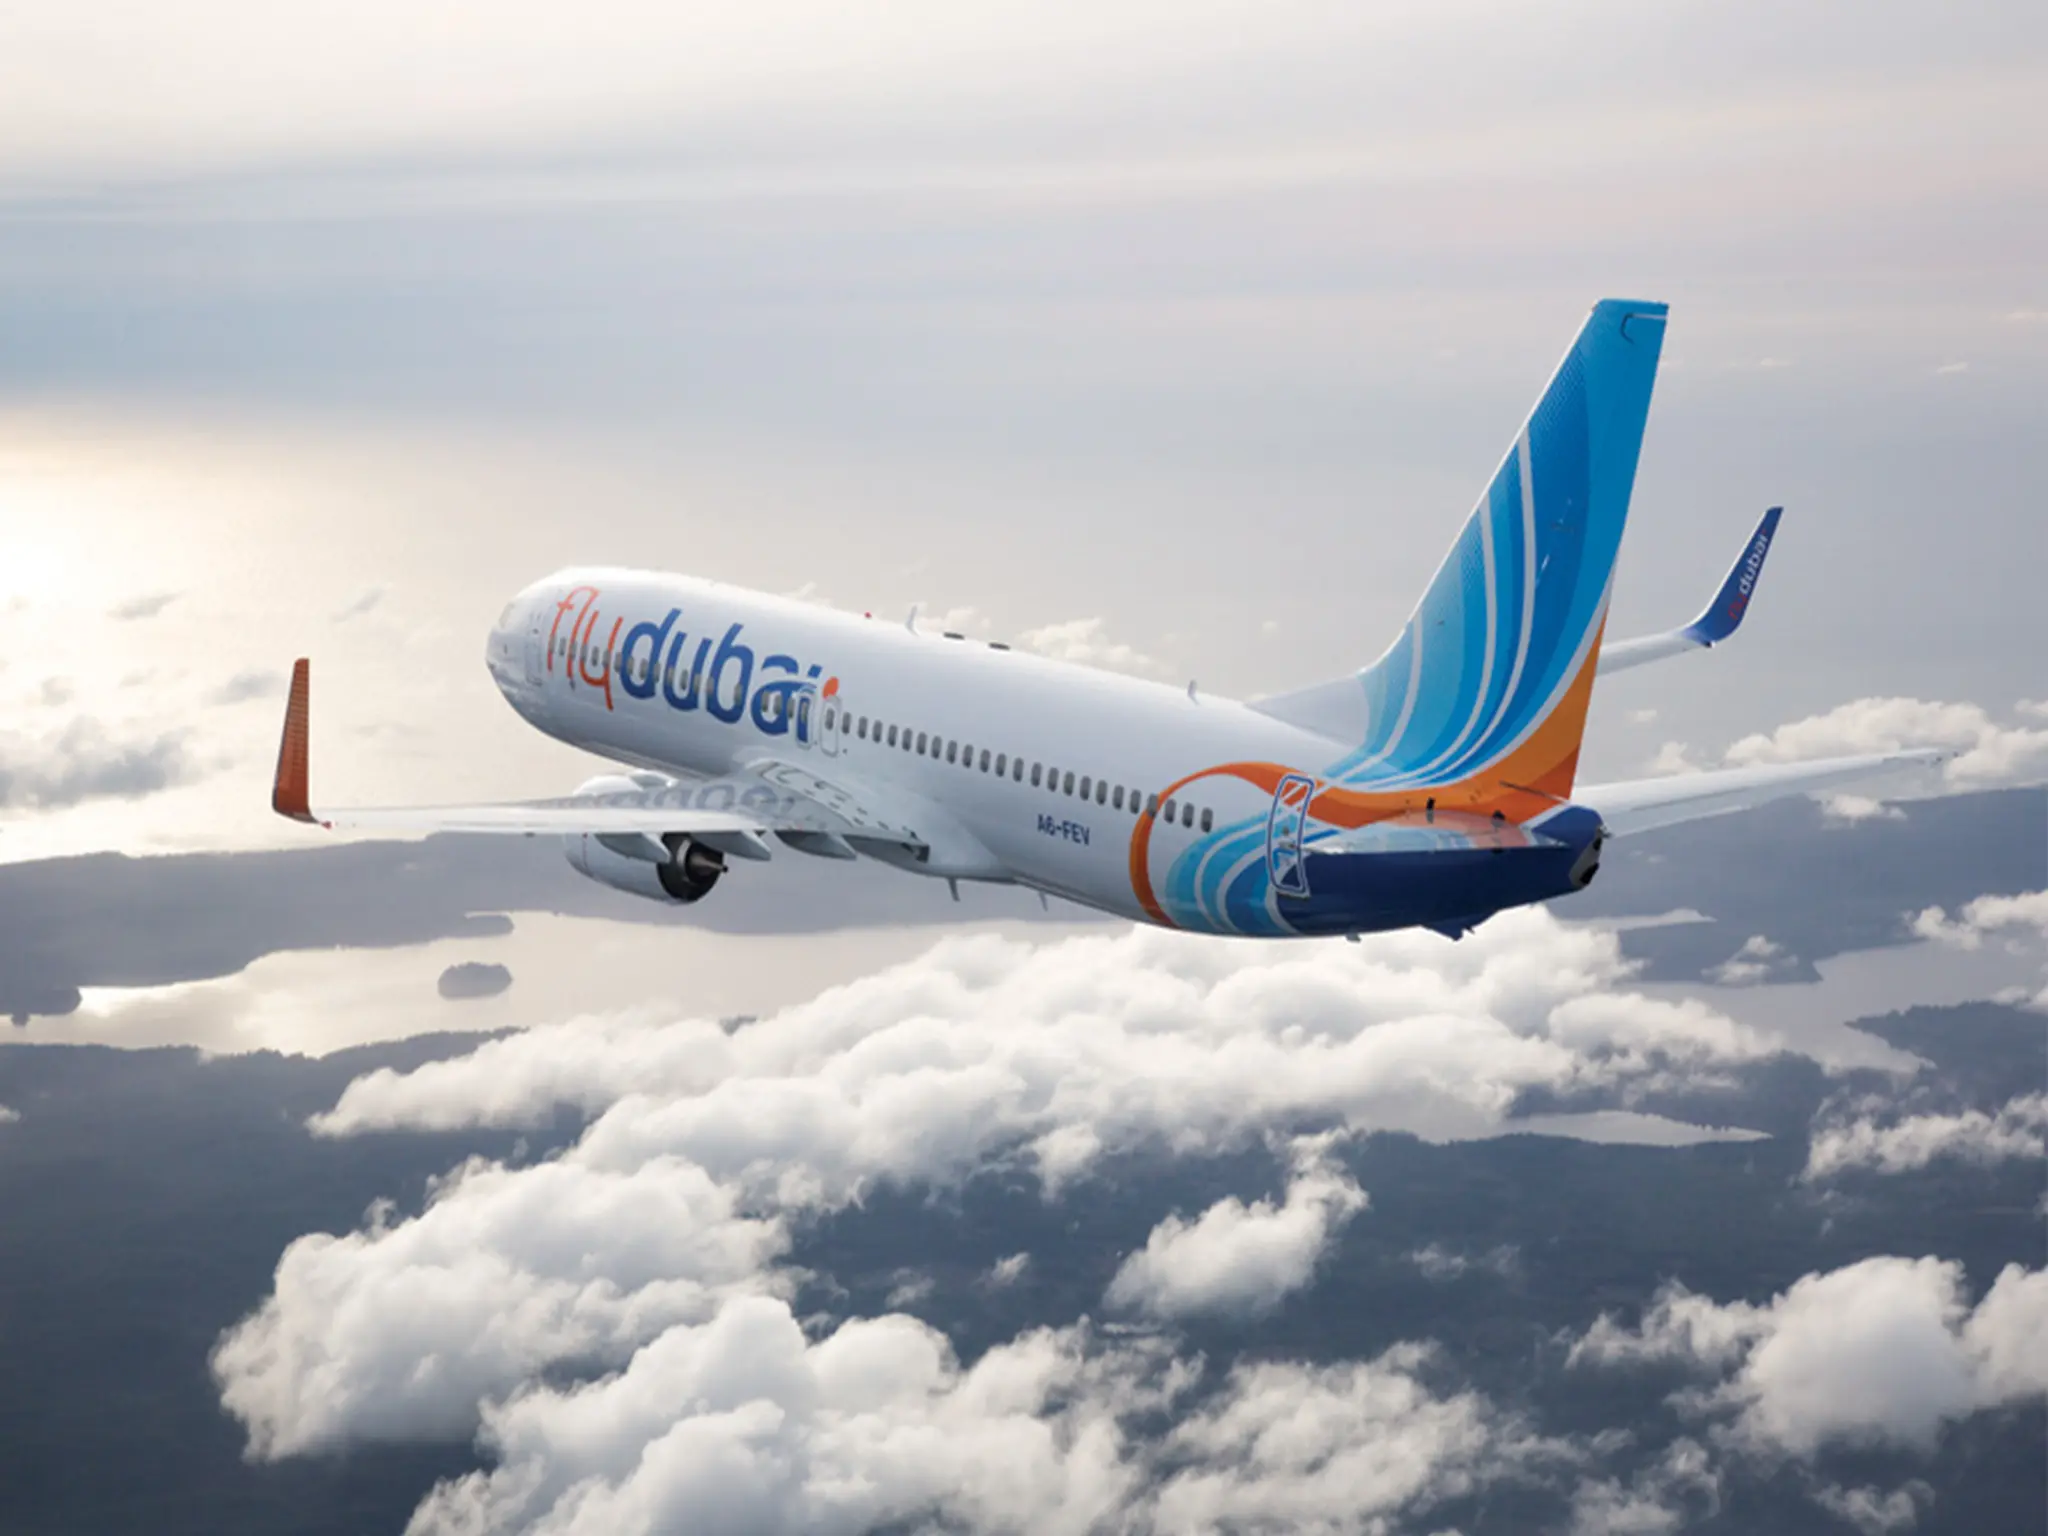 Urgent.. (Fly Dubai) announces great offers on these flights, starting June 17th